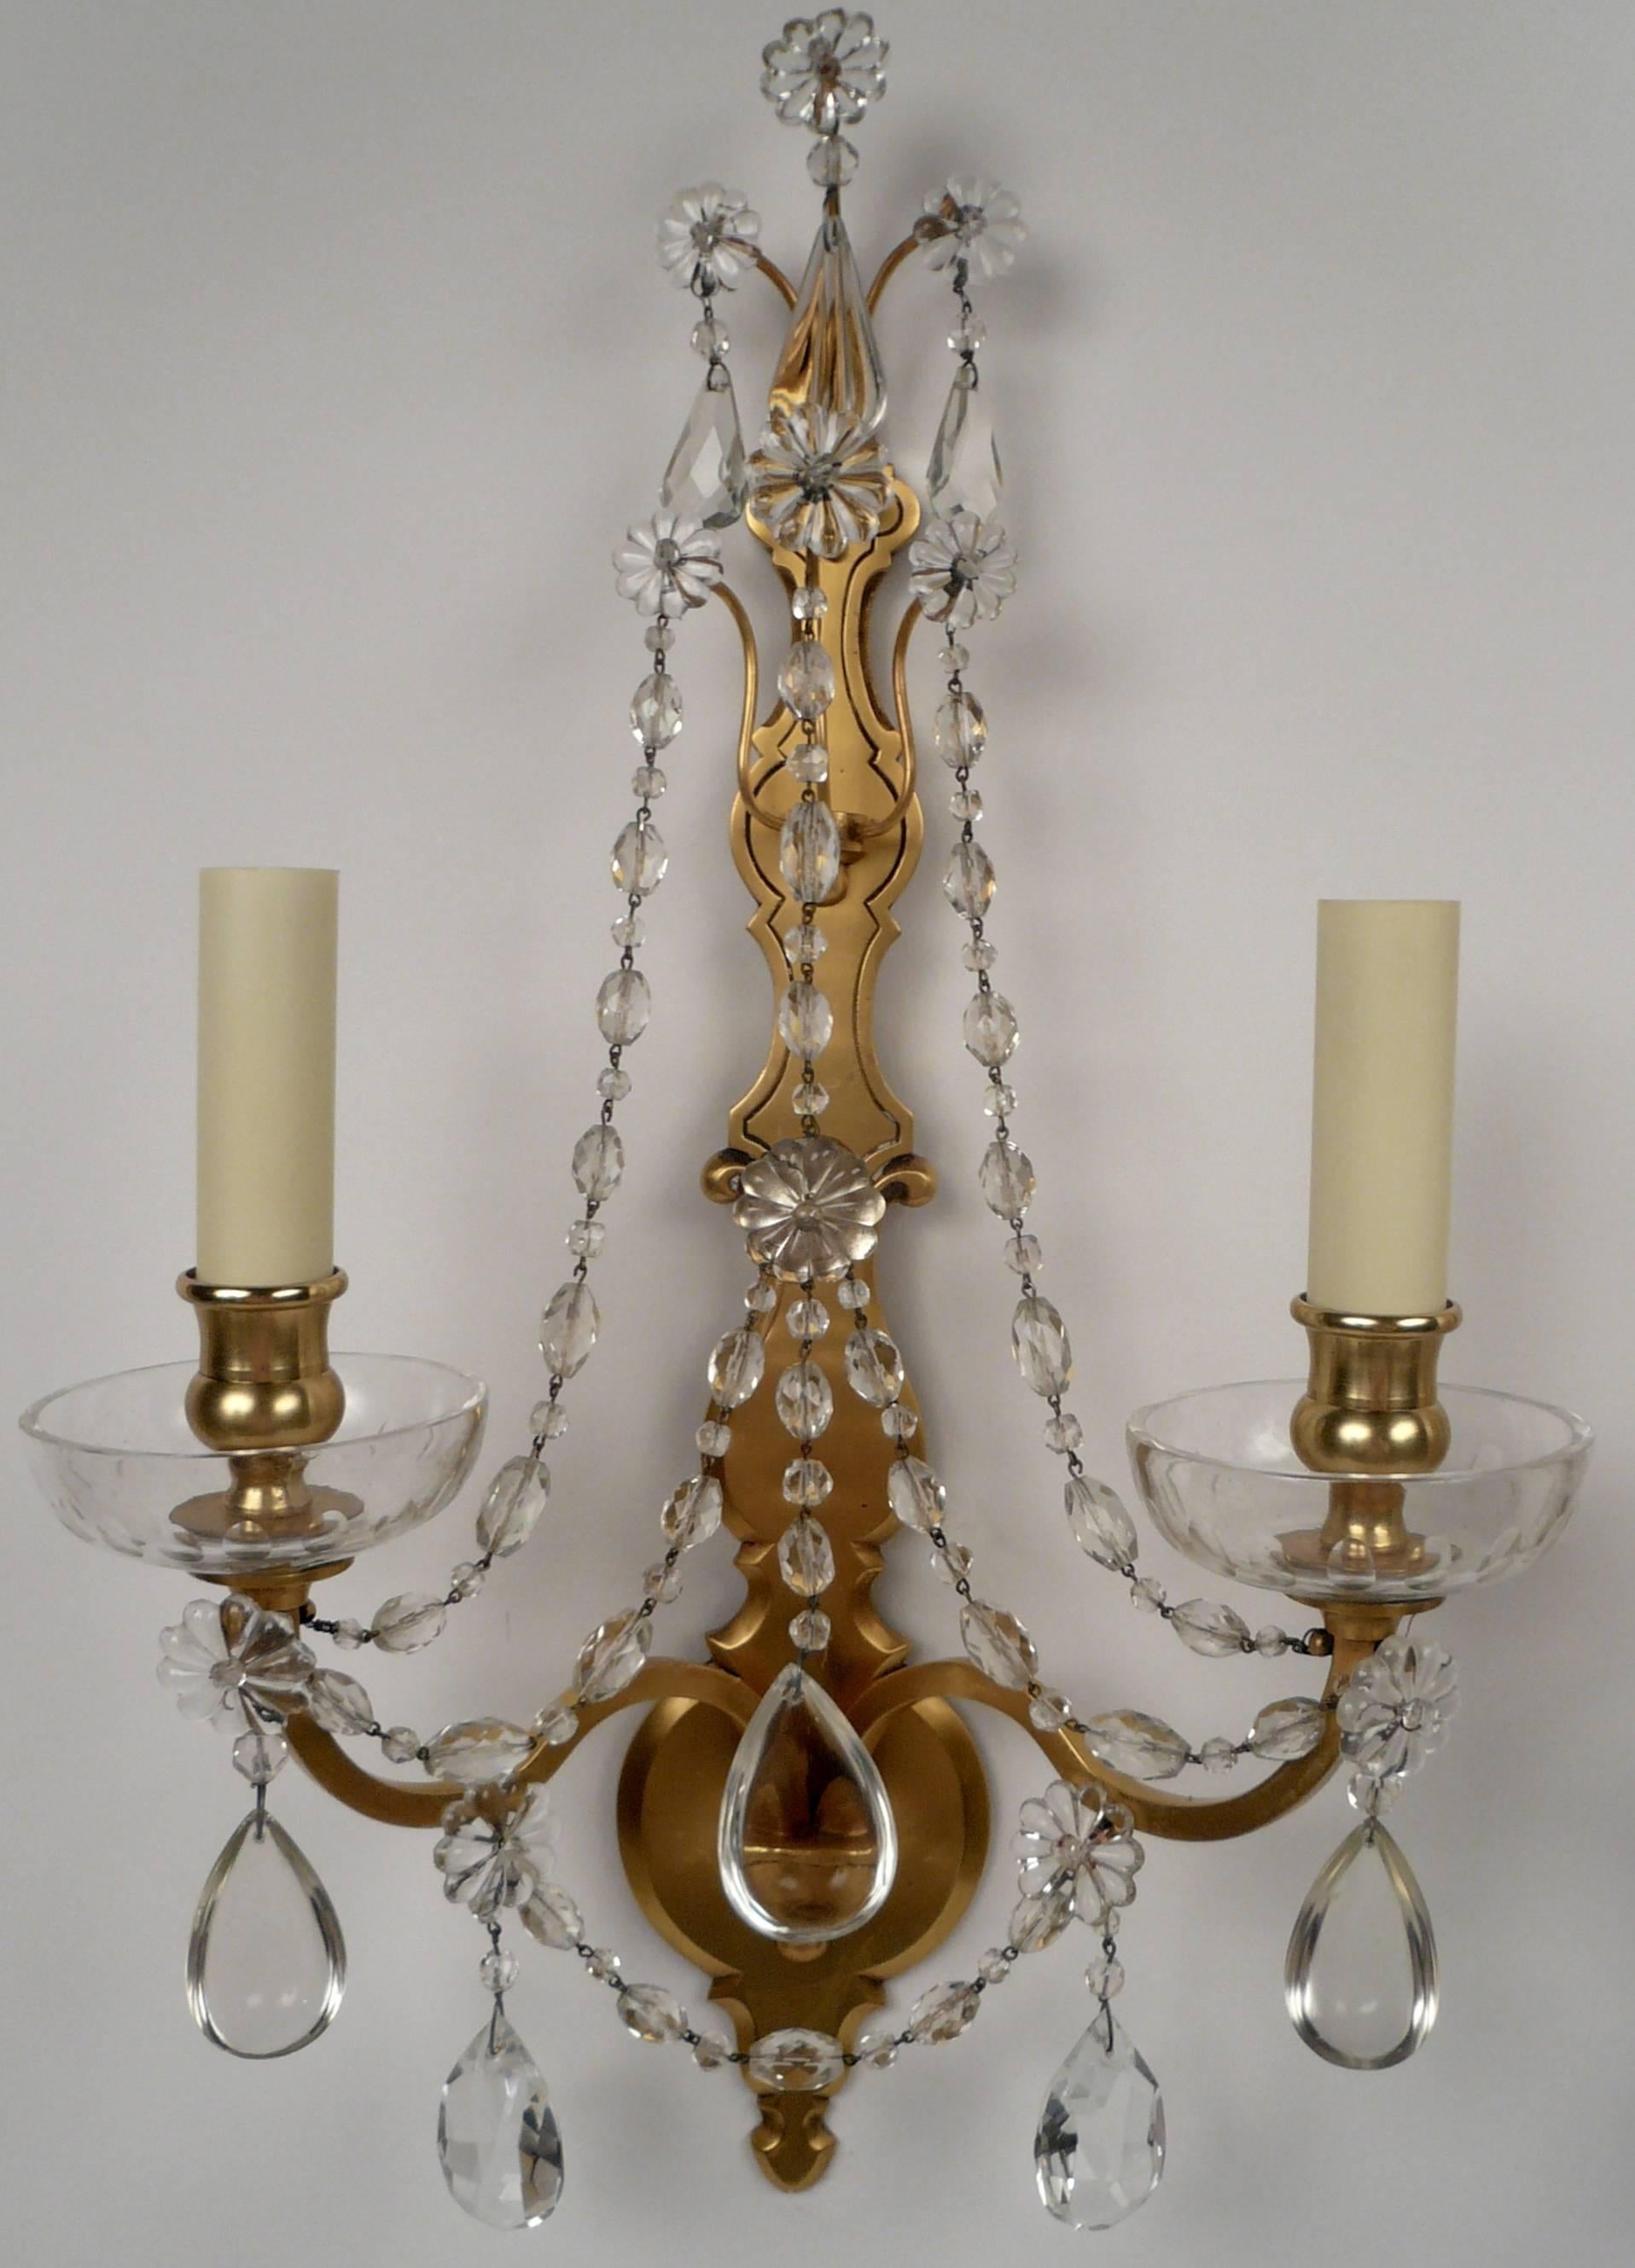 This fine pair of sconces by The Sterling Bronze Co. have there original finish and prisms and are newly wired.